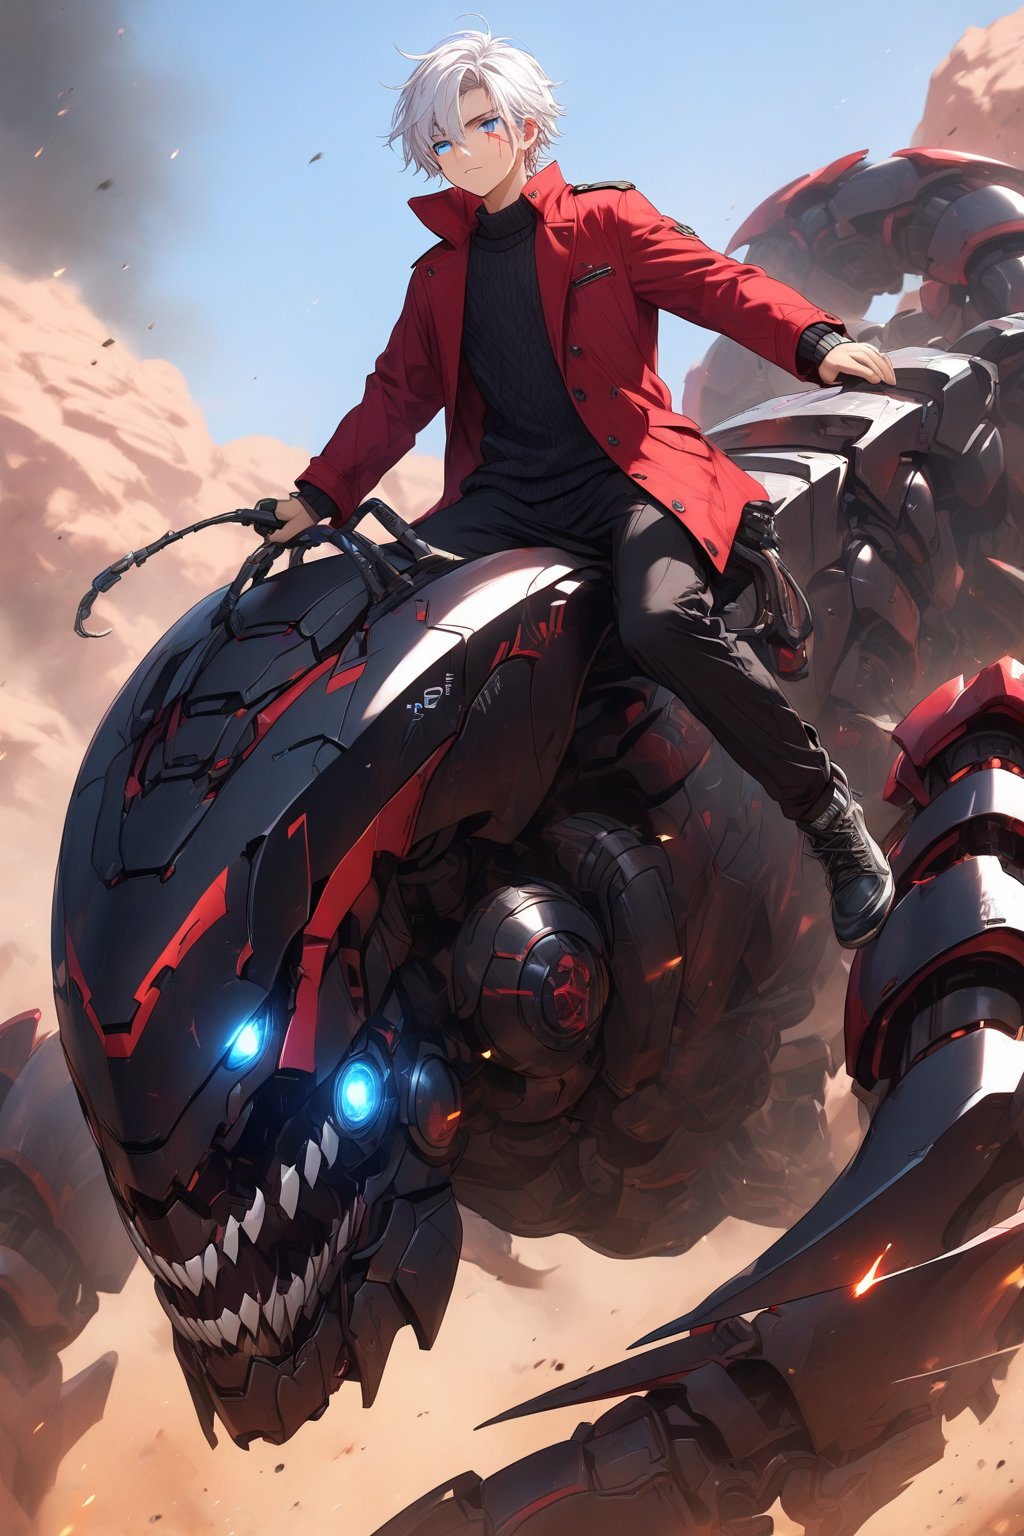 16-year-old boy, white hair, black short-sleeved sweater, black and red coat, black knee-length military pants, scar on left eye, blue eyes, riding a giant mechanical scorpion